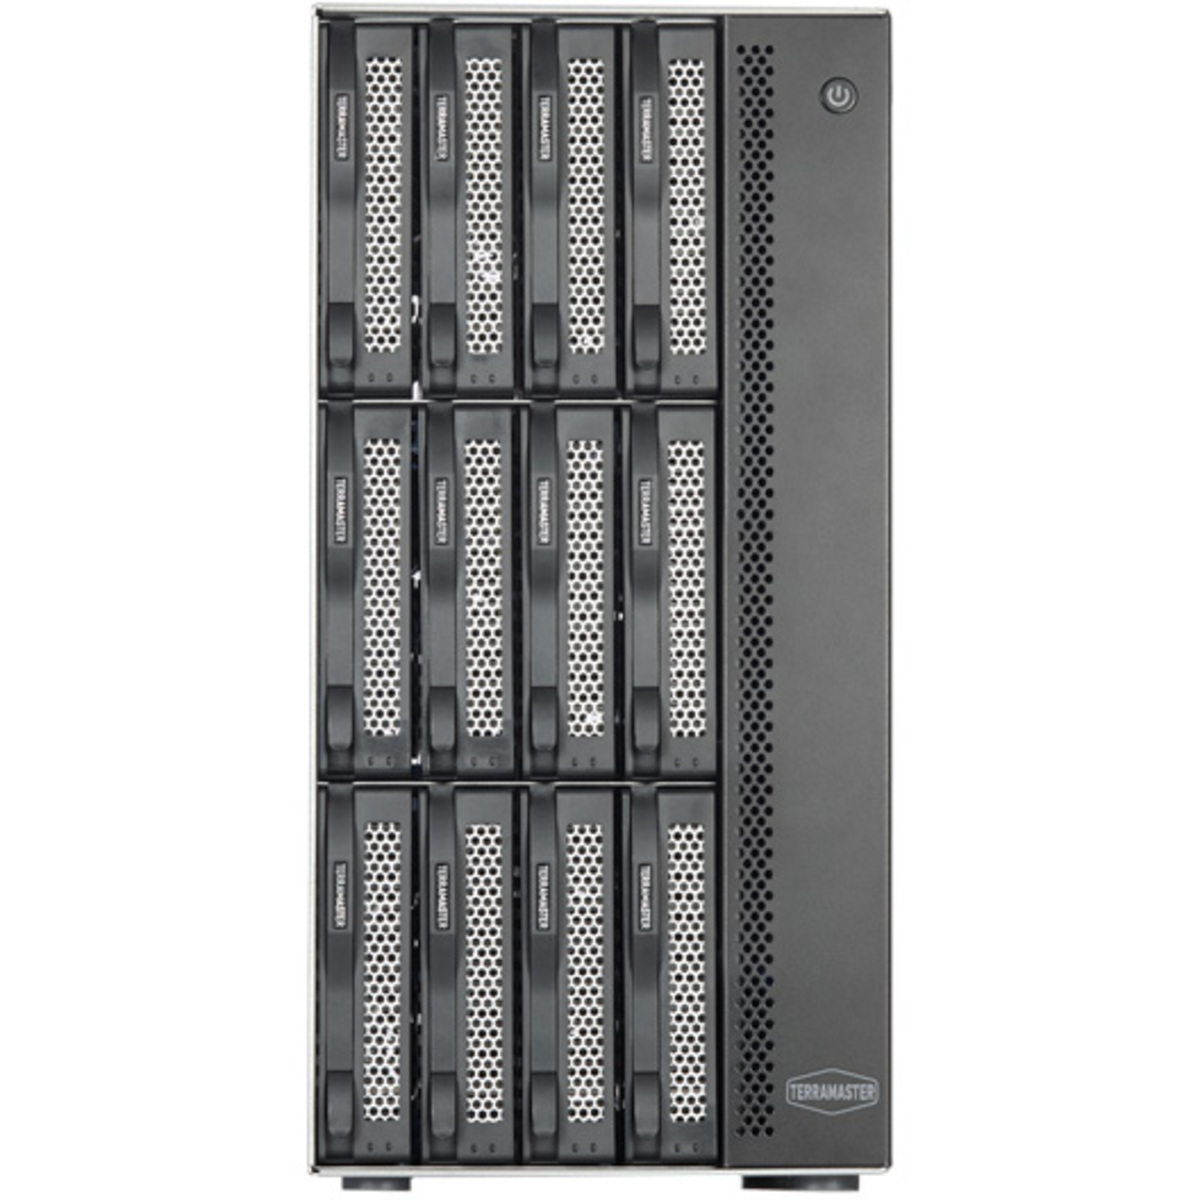 TerraMaster T12-423 90tb 12-Bay Desktop Multimedia / Power User / Business NAS - Network Attached Storage Device 9x10tb Seagate EXOS X18 ST10000NM018G 3.5 7200rpm SATA 6Gb/s HDD ENTERPRISE Class Drives Installed - Burn-In Tested T12-423